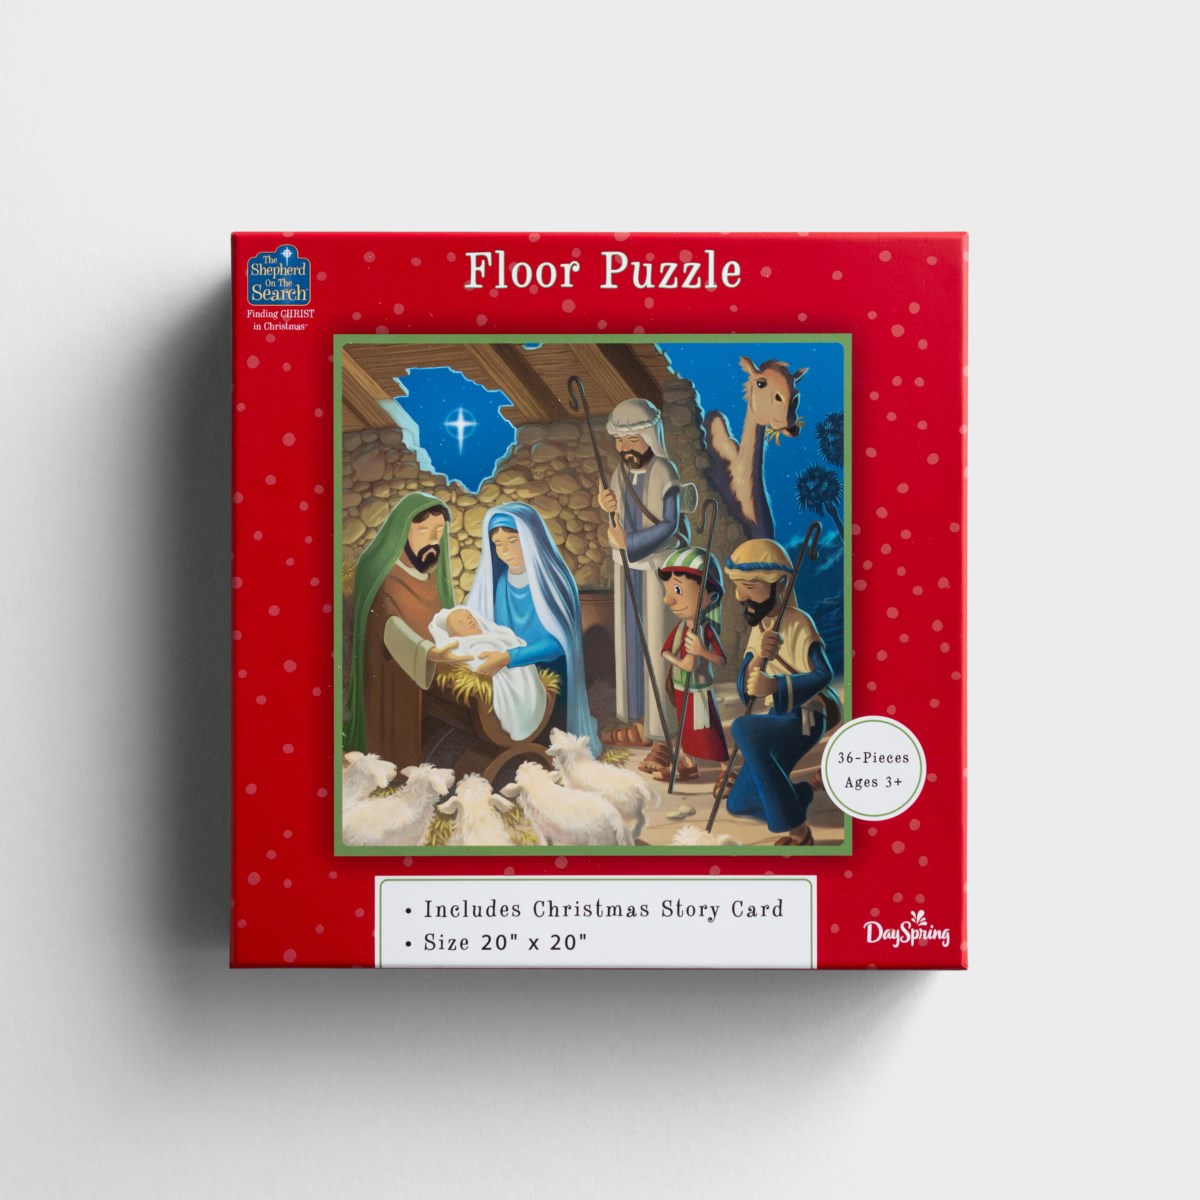 The Shepherd on the Search - Finding Christ in Christmas - 36 Piece Floor Puzzle